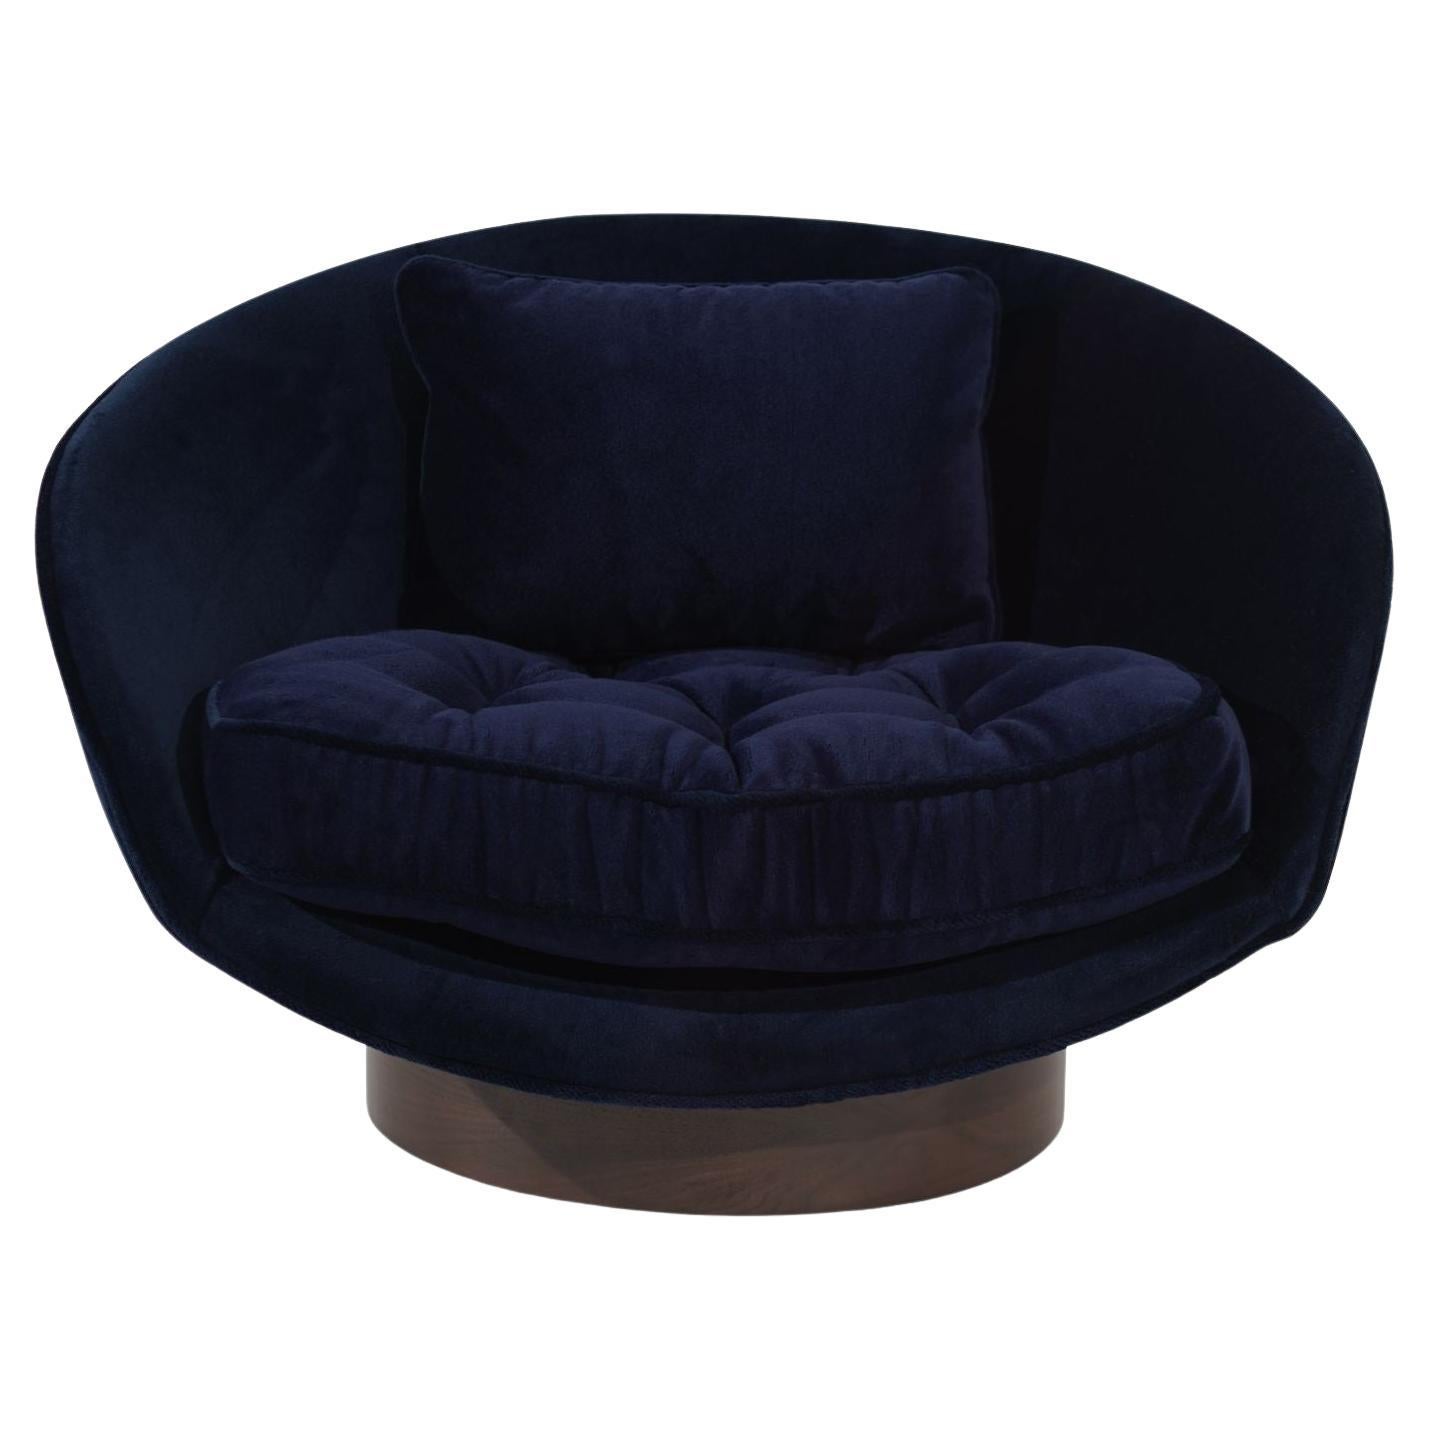 Low Profile Lounge Chair in Navy Alpaca Velvet by Adrian Pearsall, C. 1950s For Sale